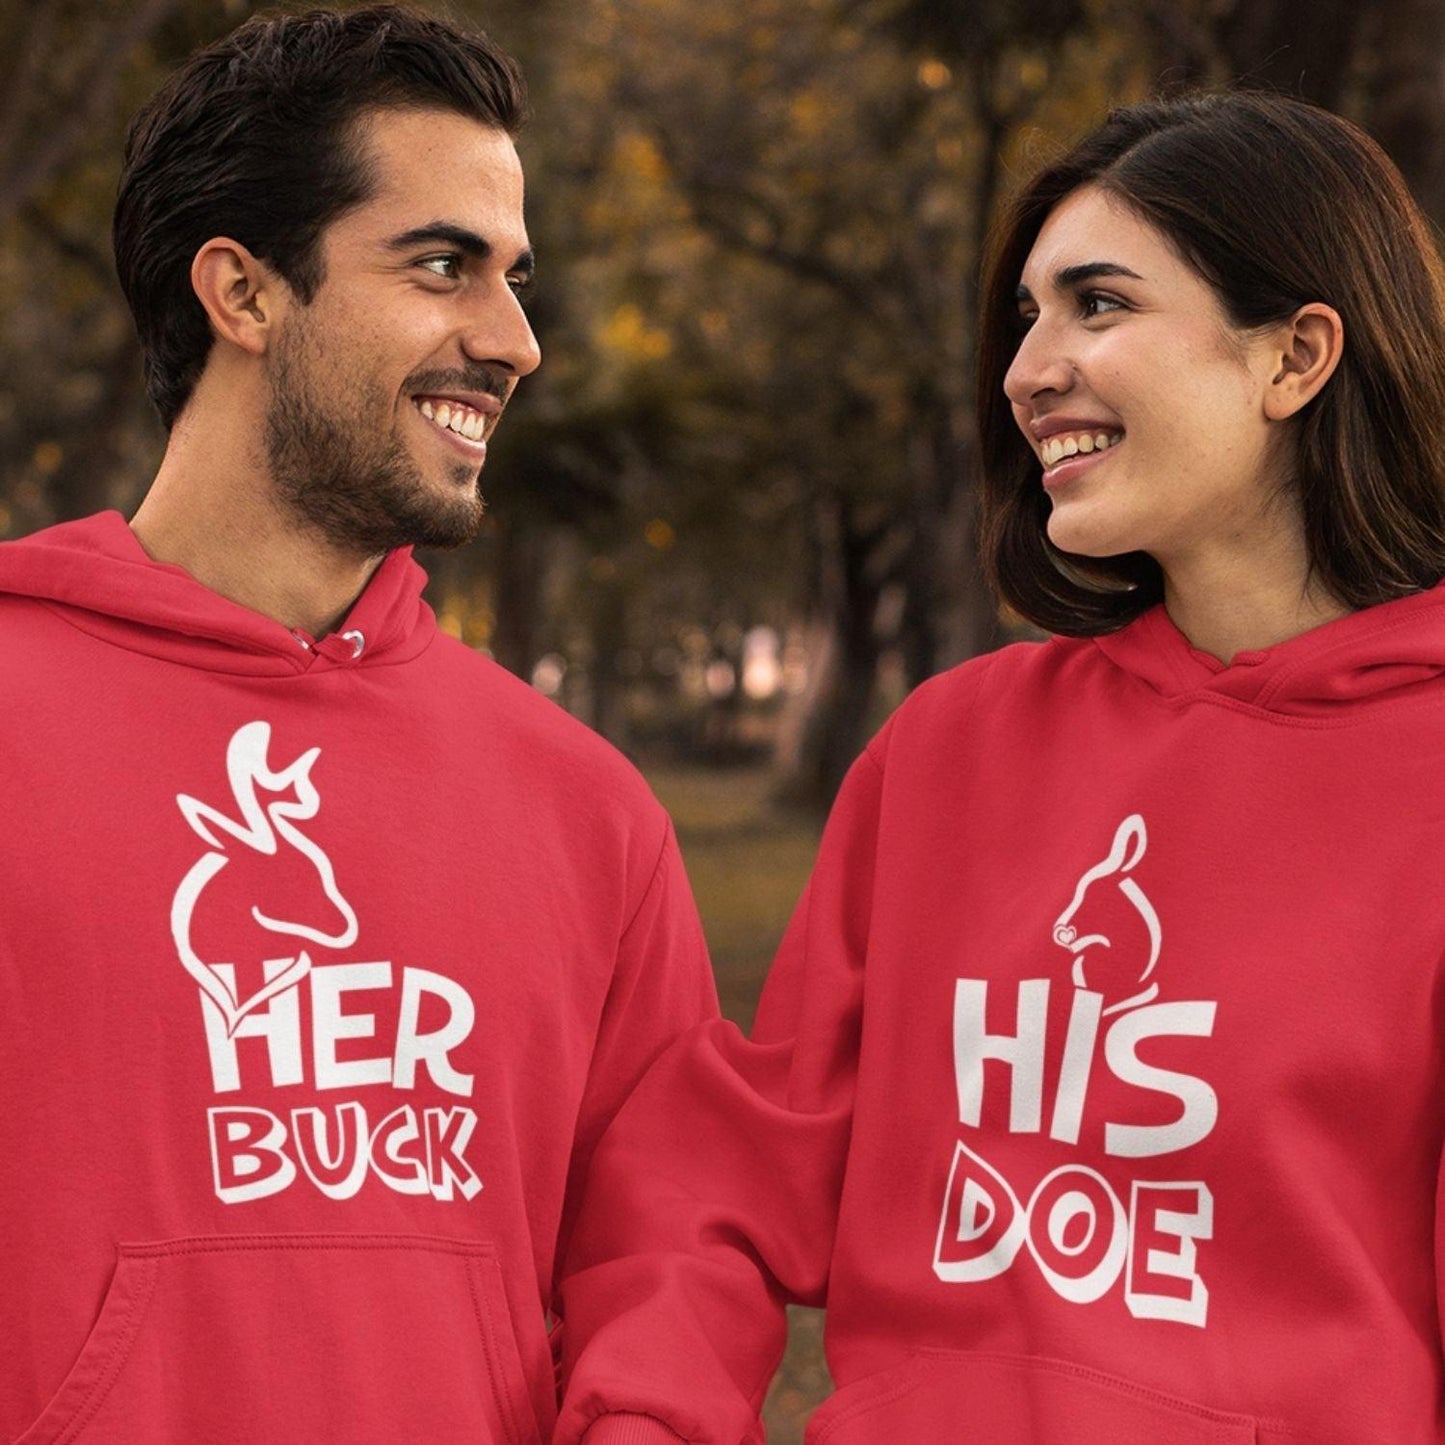 Custom His & Hers Matching Set for Valentine's & Christmas: Her Buck & His Doe - 4Lovebirds